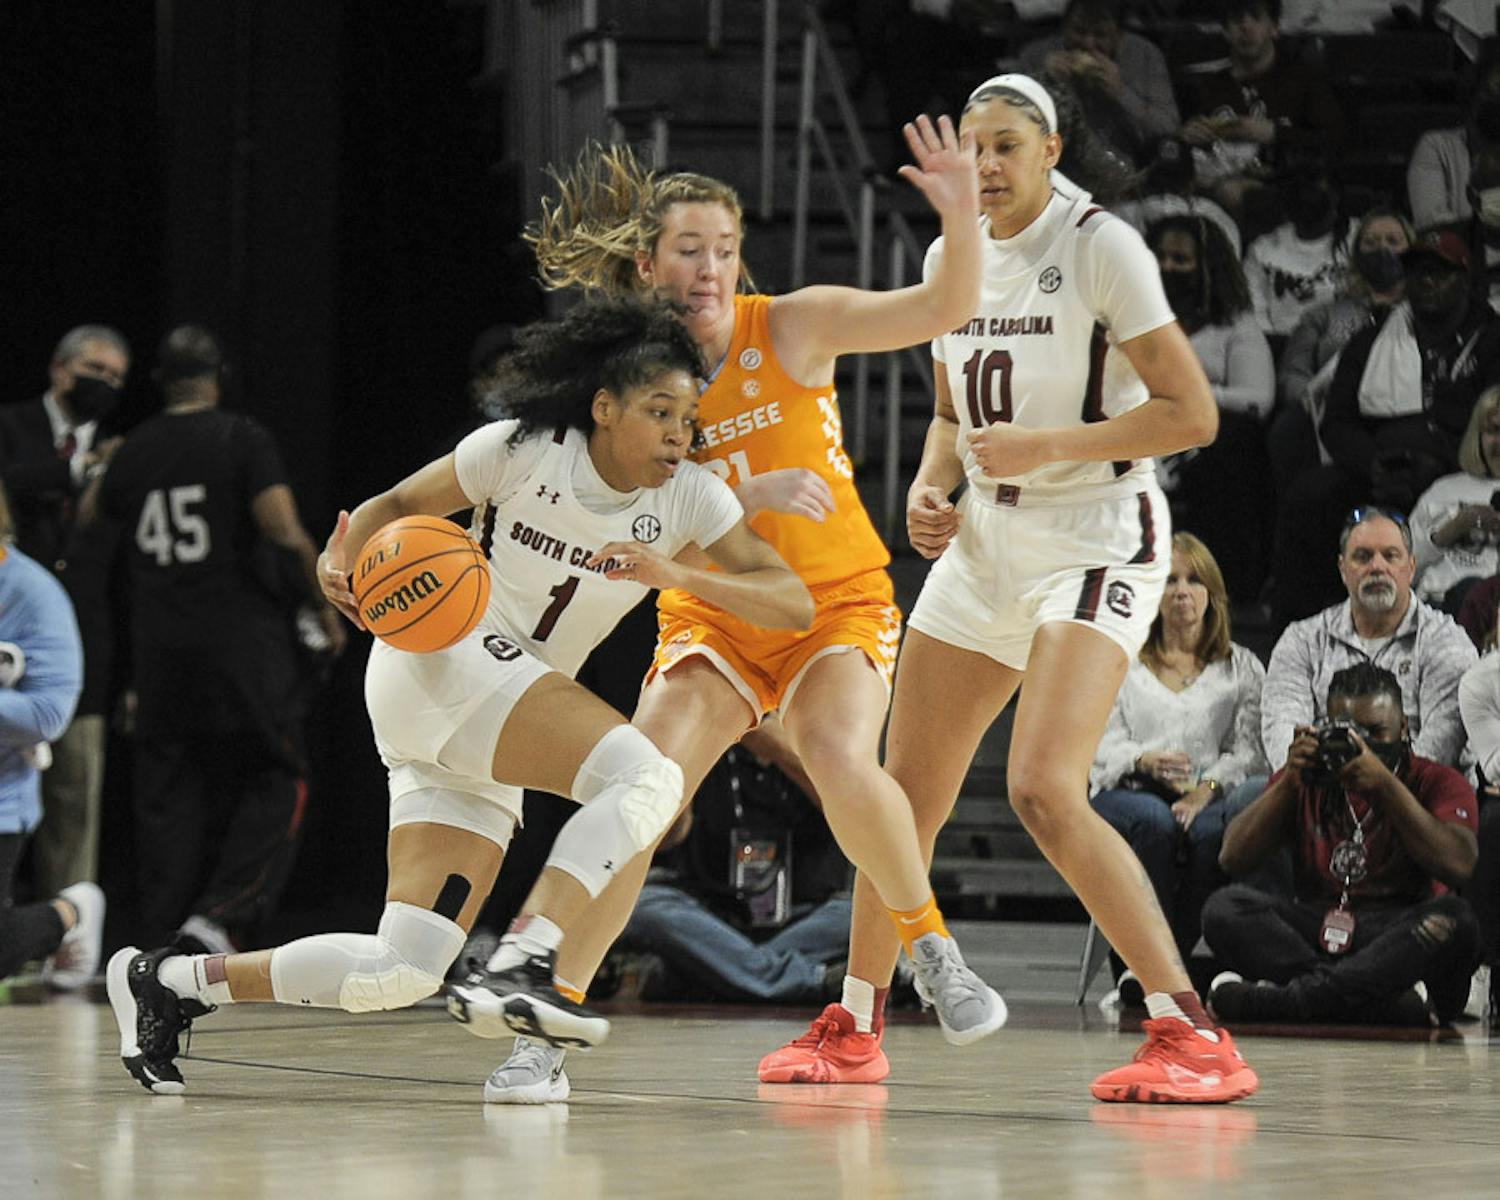 FILE—Senior guard Zia Cooke gets fouled while going towards the basket during the game against Tennessee on Feb. 23, 2022, at Colonial Life Arena. The Gamecocks beat the Volunteers for the second time in the 2022-2023 season during the SEC tournament in Greenville, South Carolina on March 5, 2023.&nbsp;